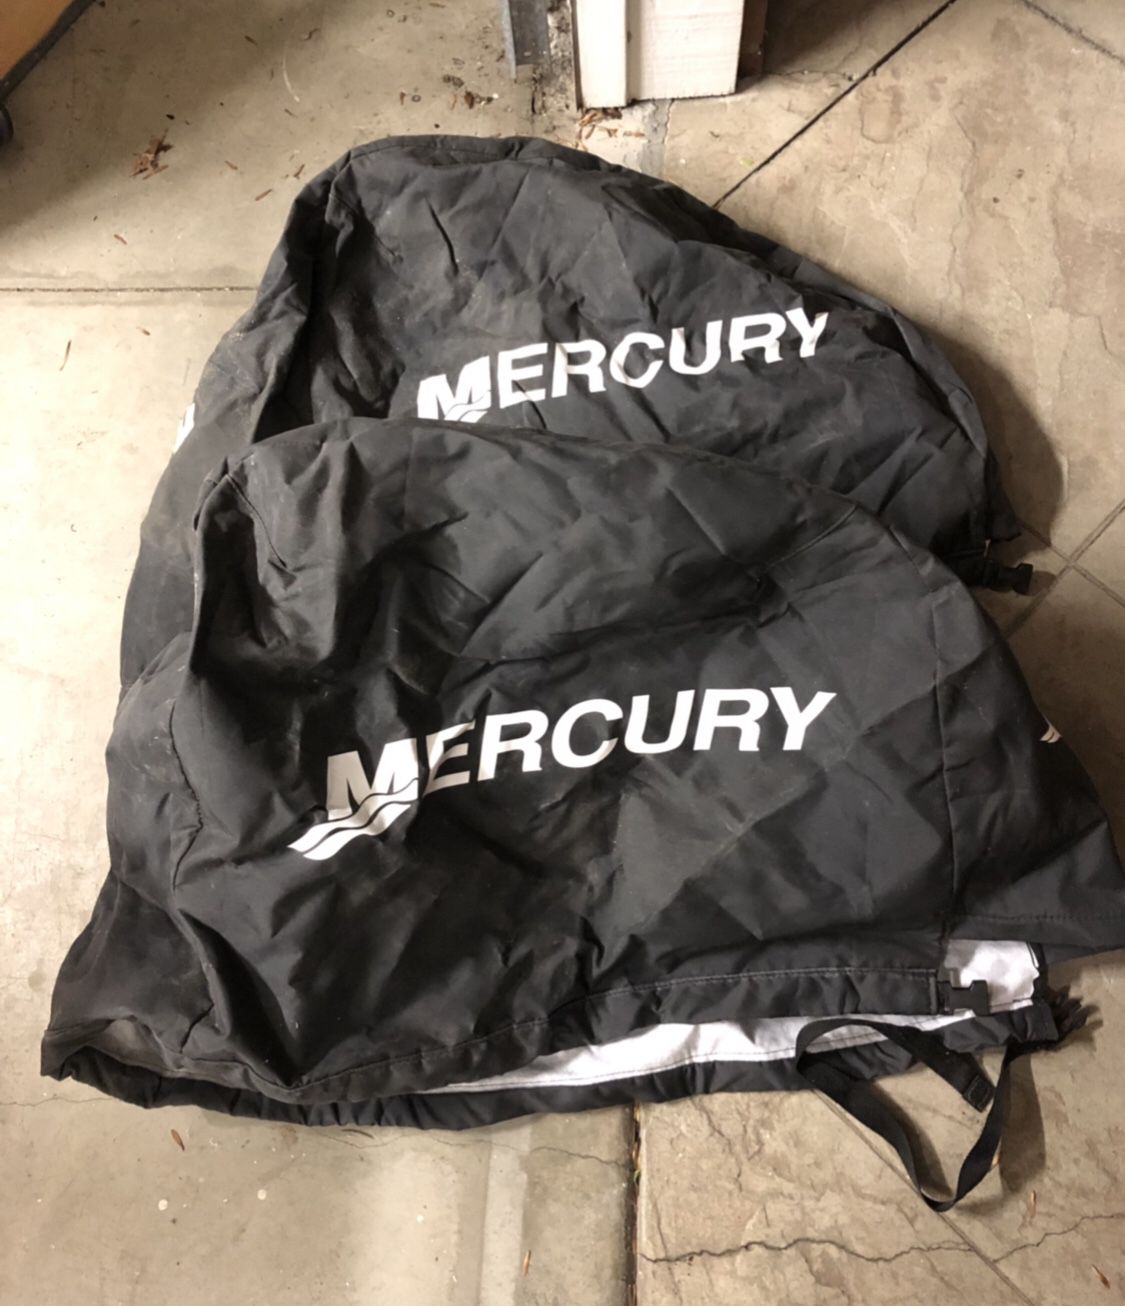 (2) Mercury Outboard Engine / Motor Covers - Black, Breathable